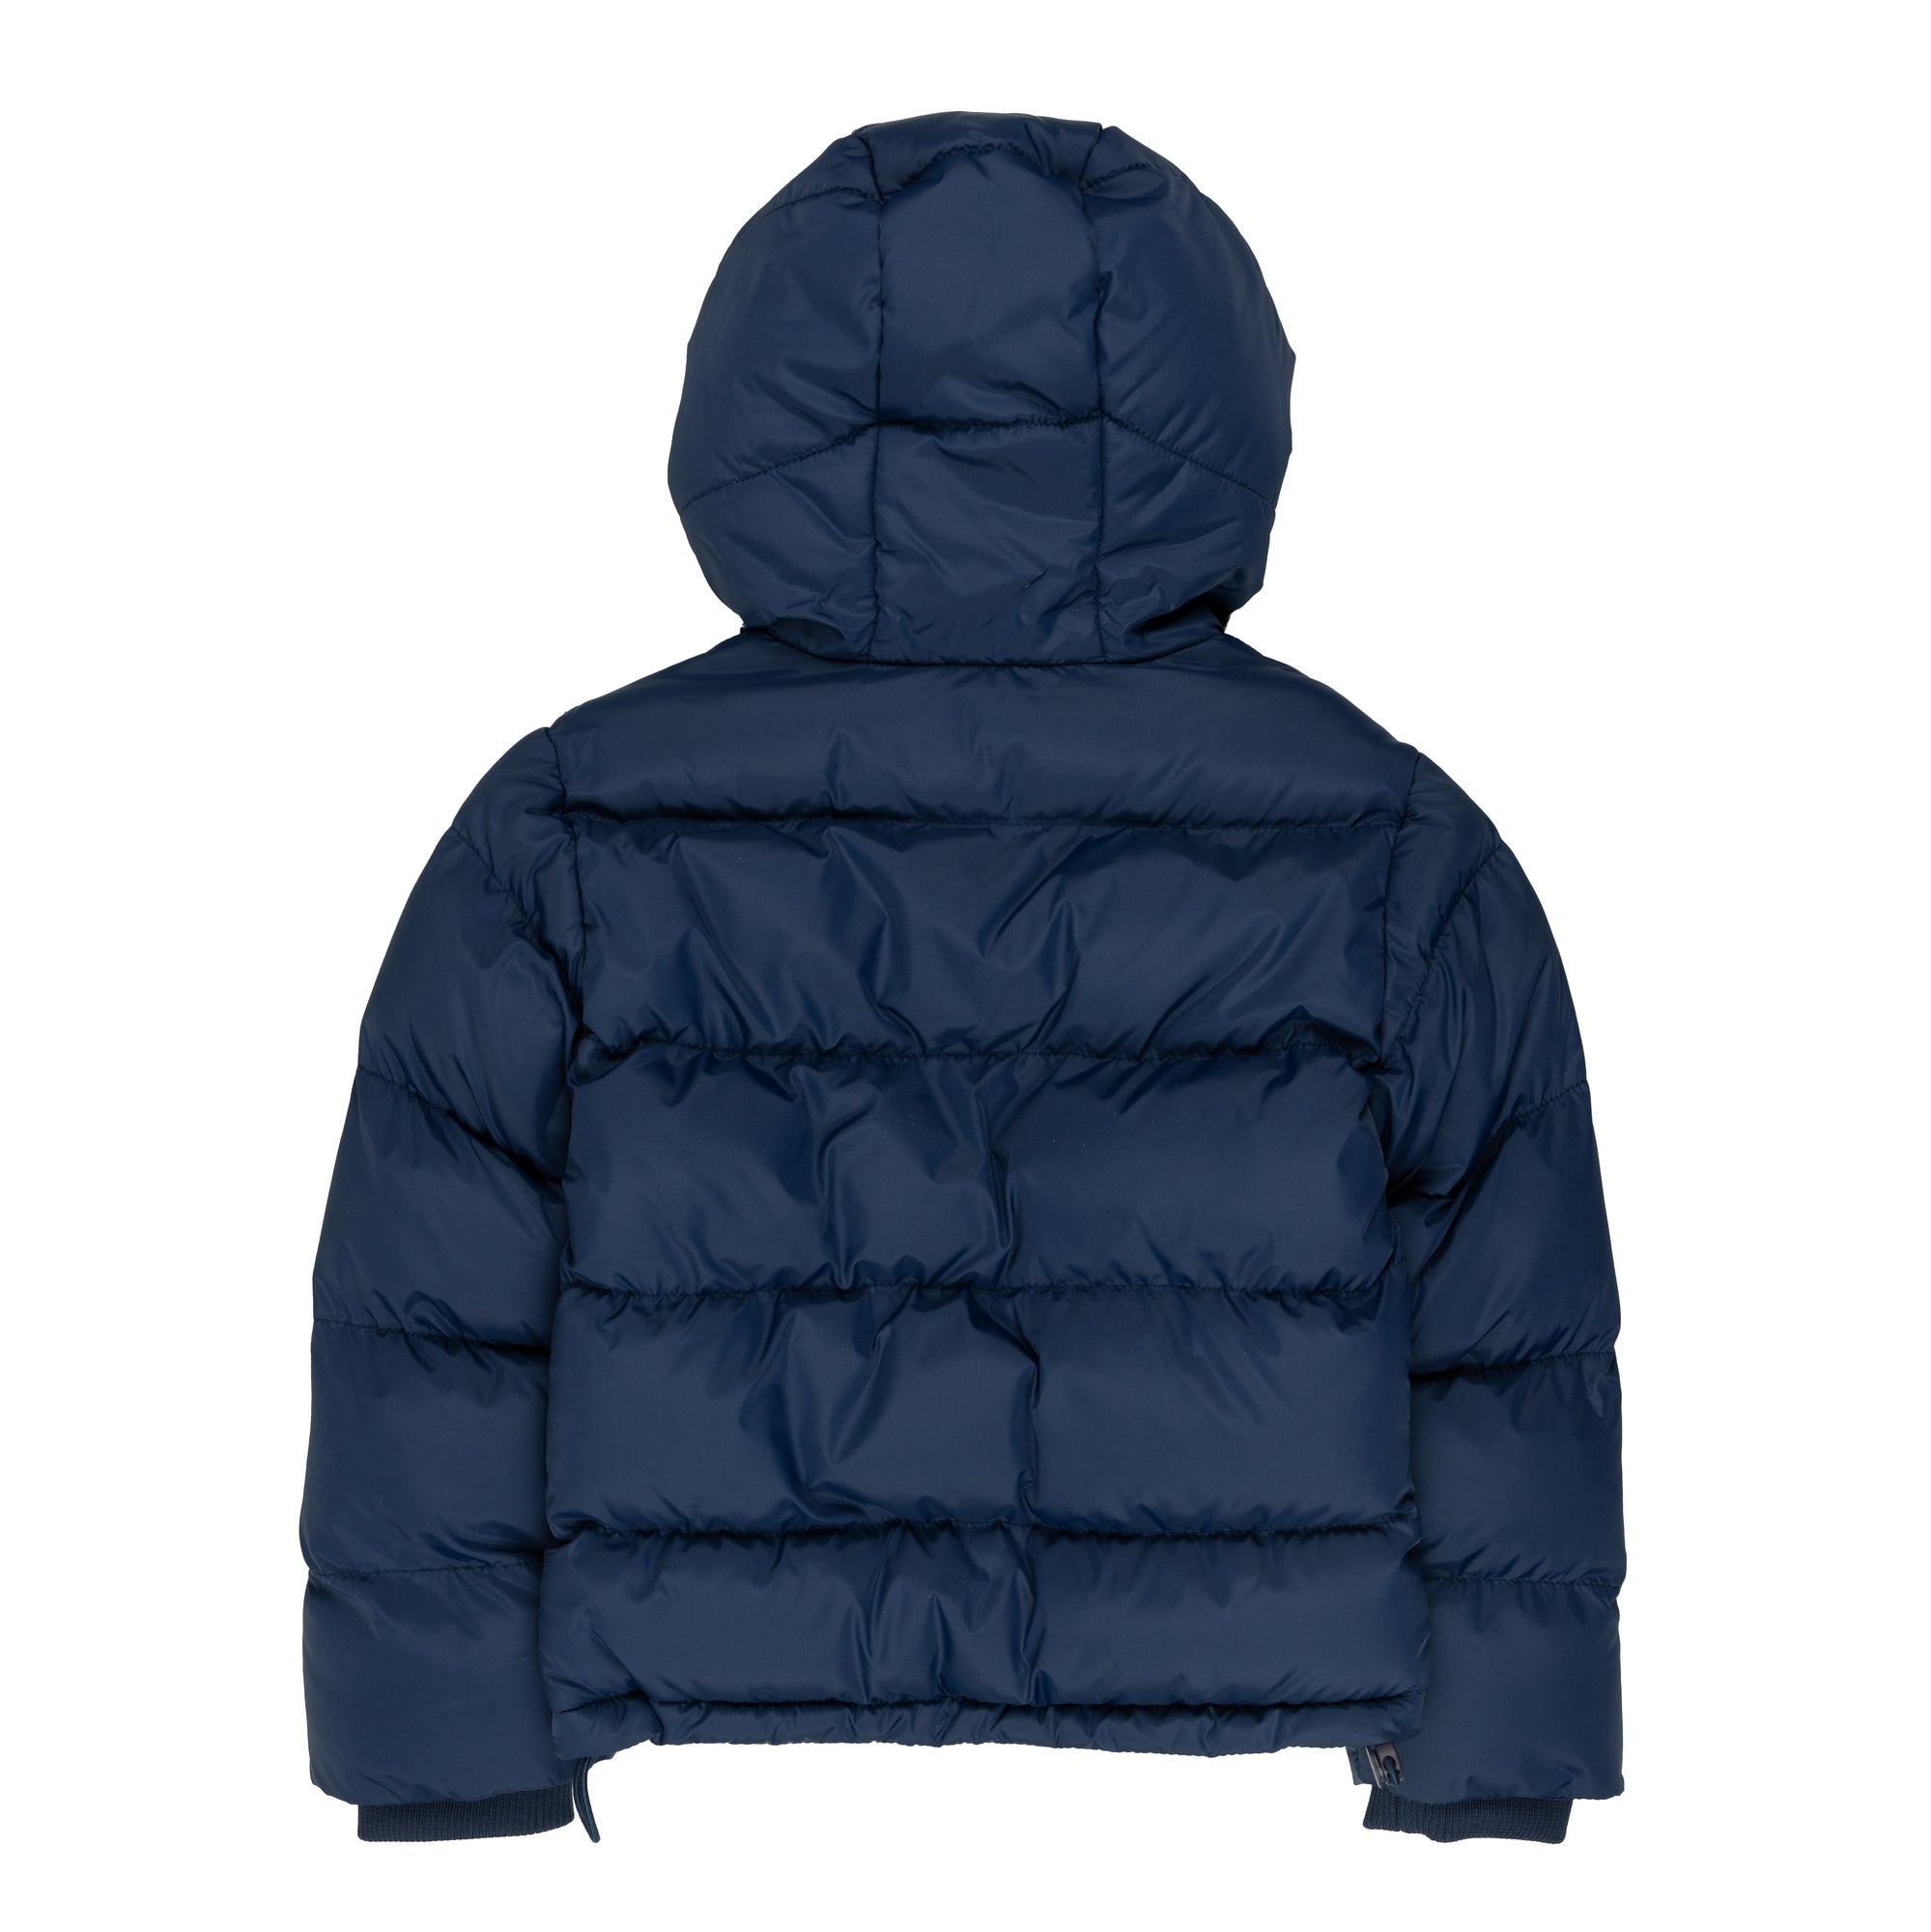 Nylon jacket with chest band, zip and hood